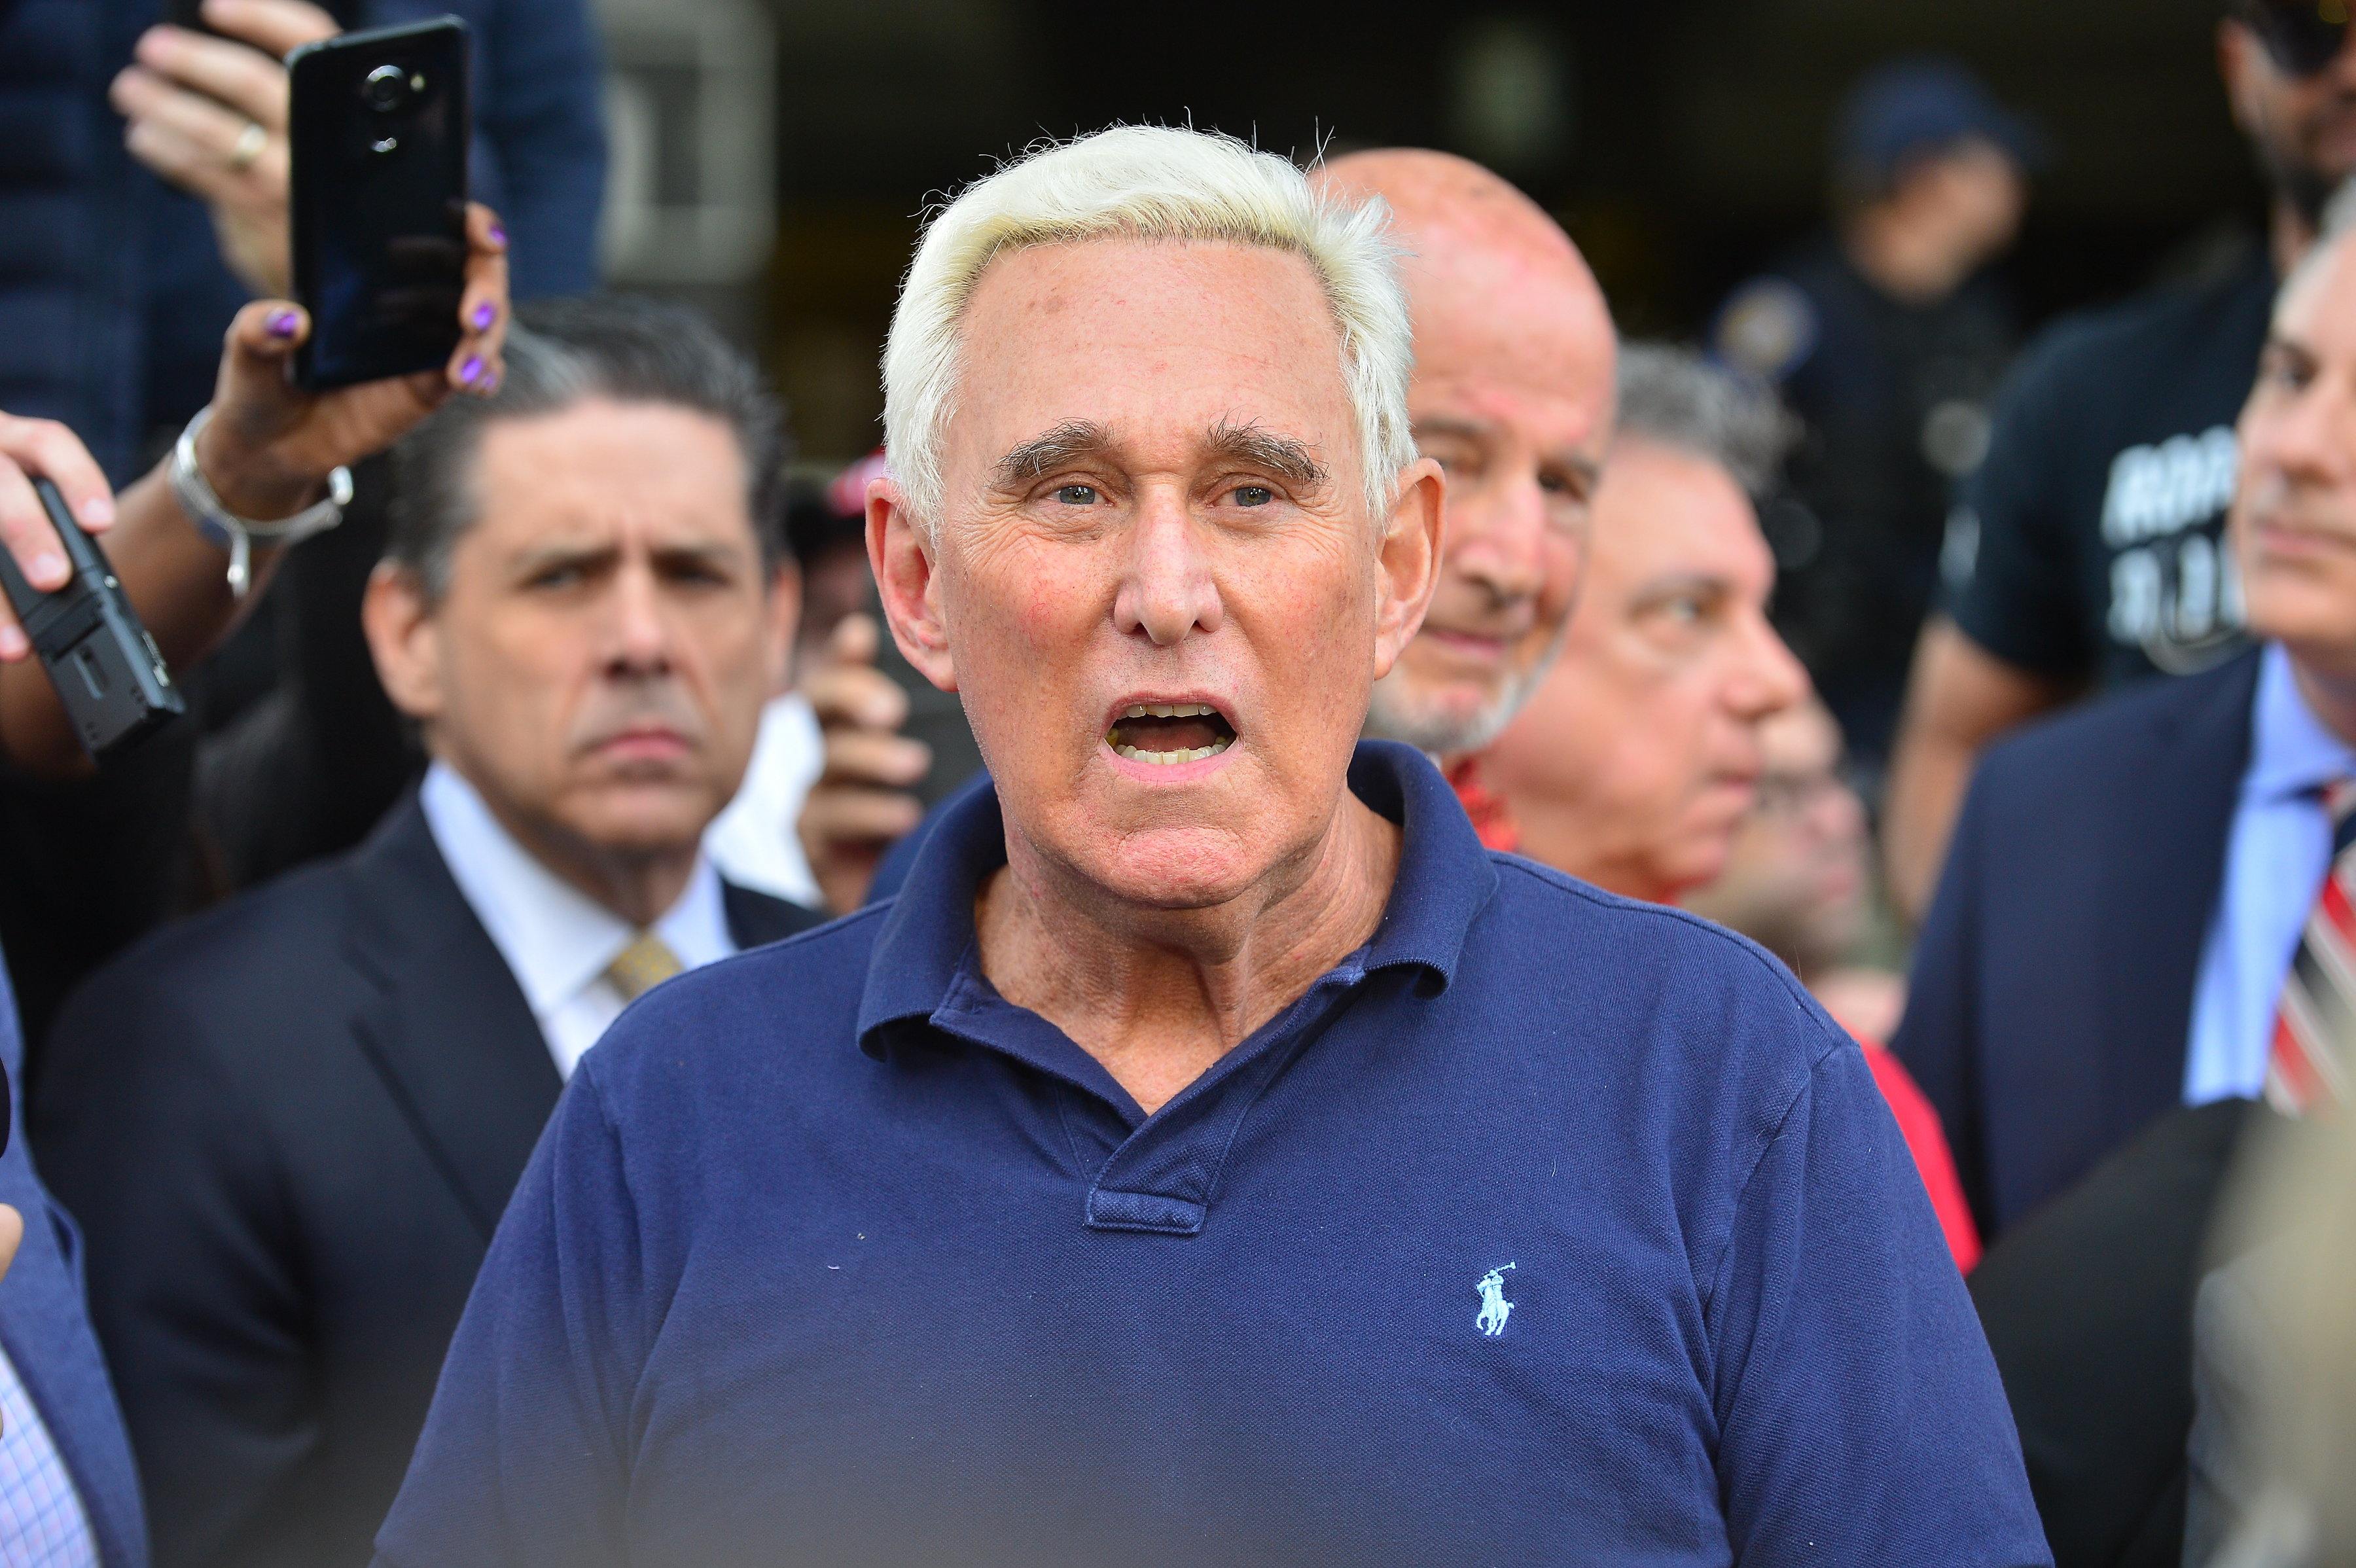 Roger Stone, former Trump campaign advisor, speaks to the media outside the Fort Lauderdale Federal Courthouse after being arrested by the FBI